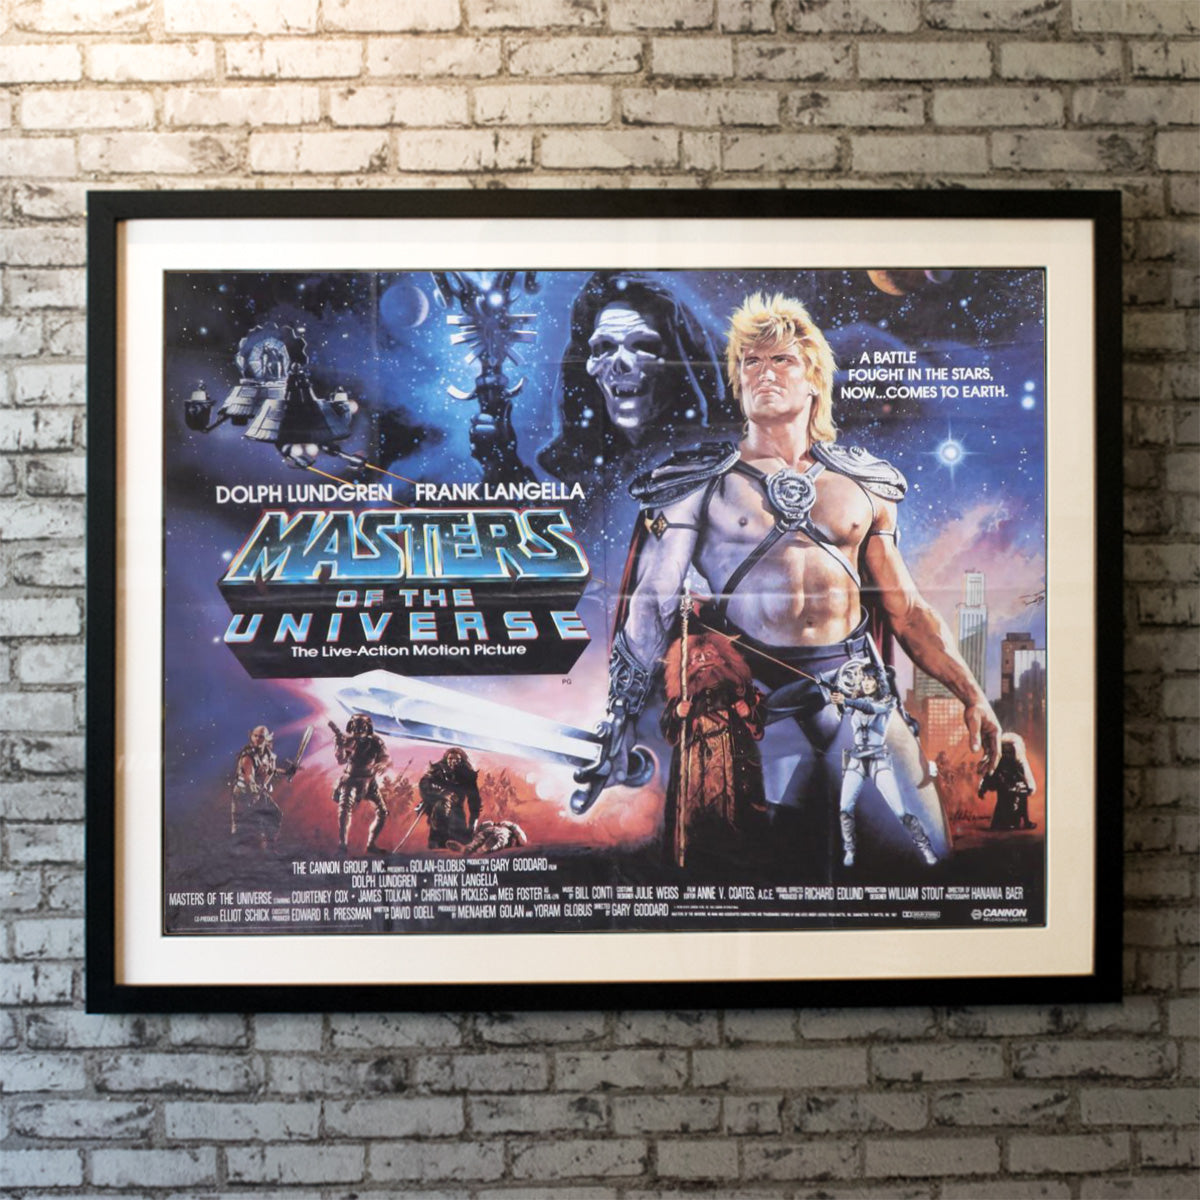 Original Movie Poster of Masters Of The Universe (1987)